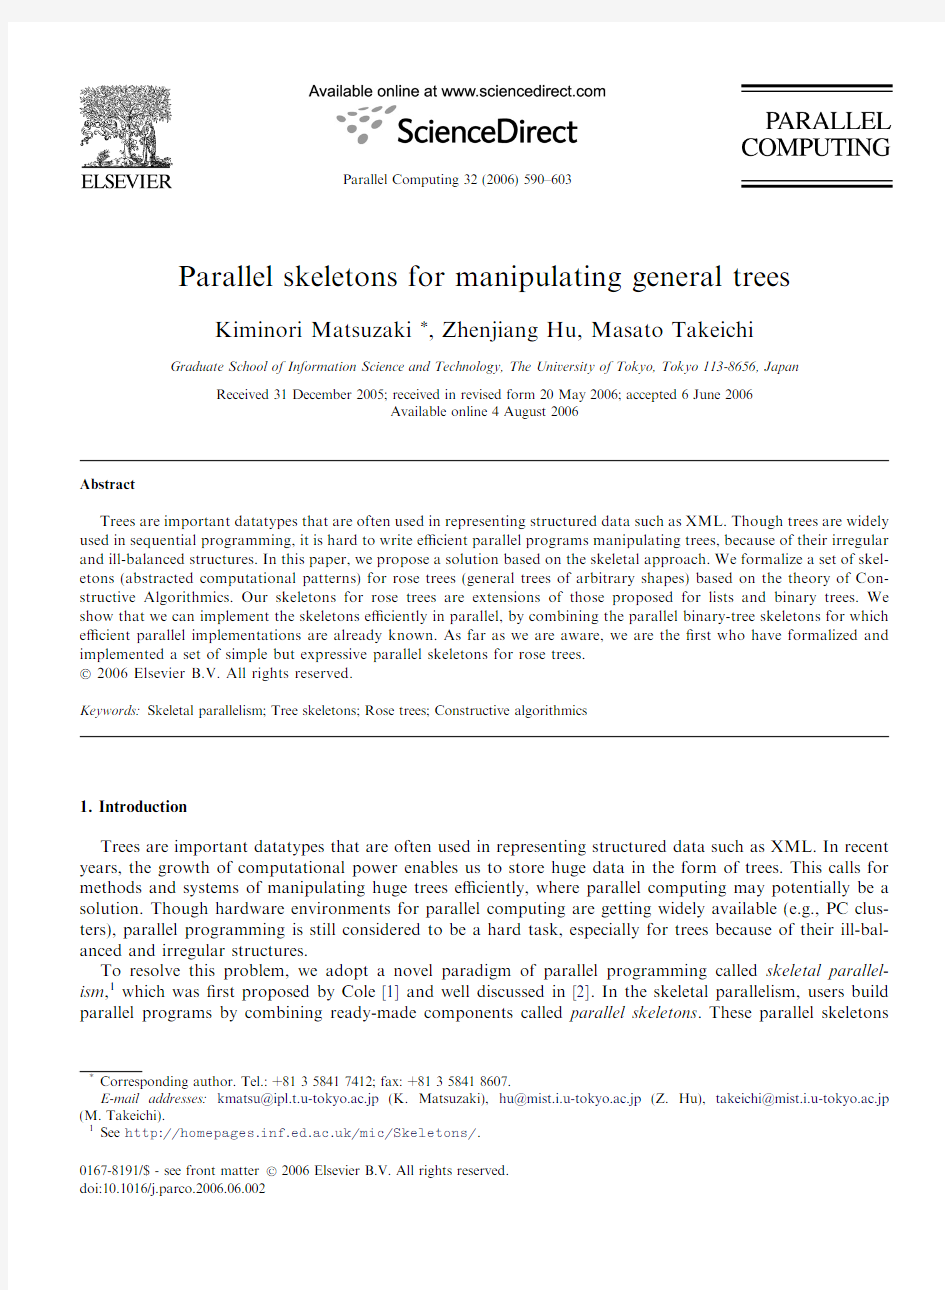 Abstract Parallel skeletons for manipulating general trees